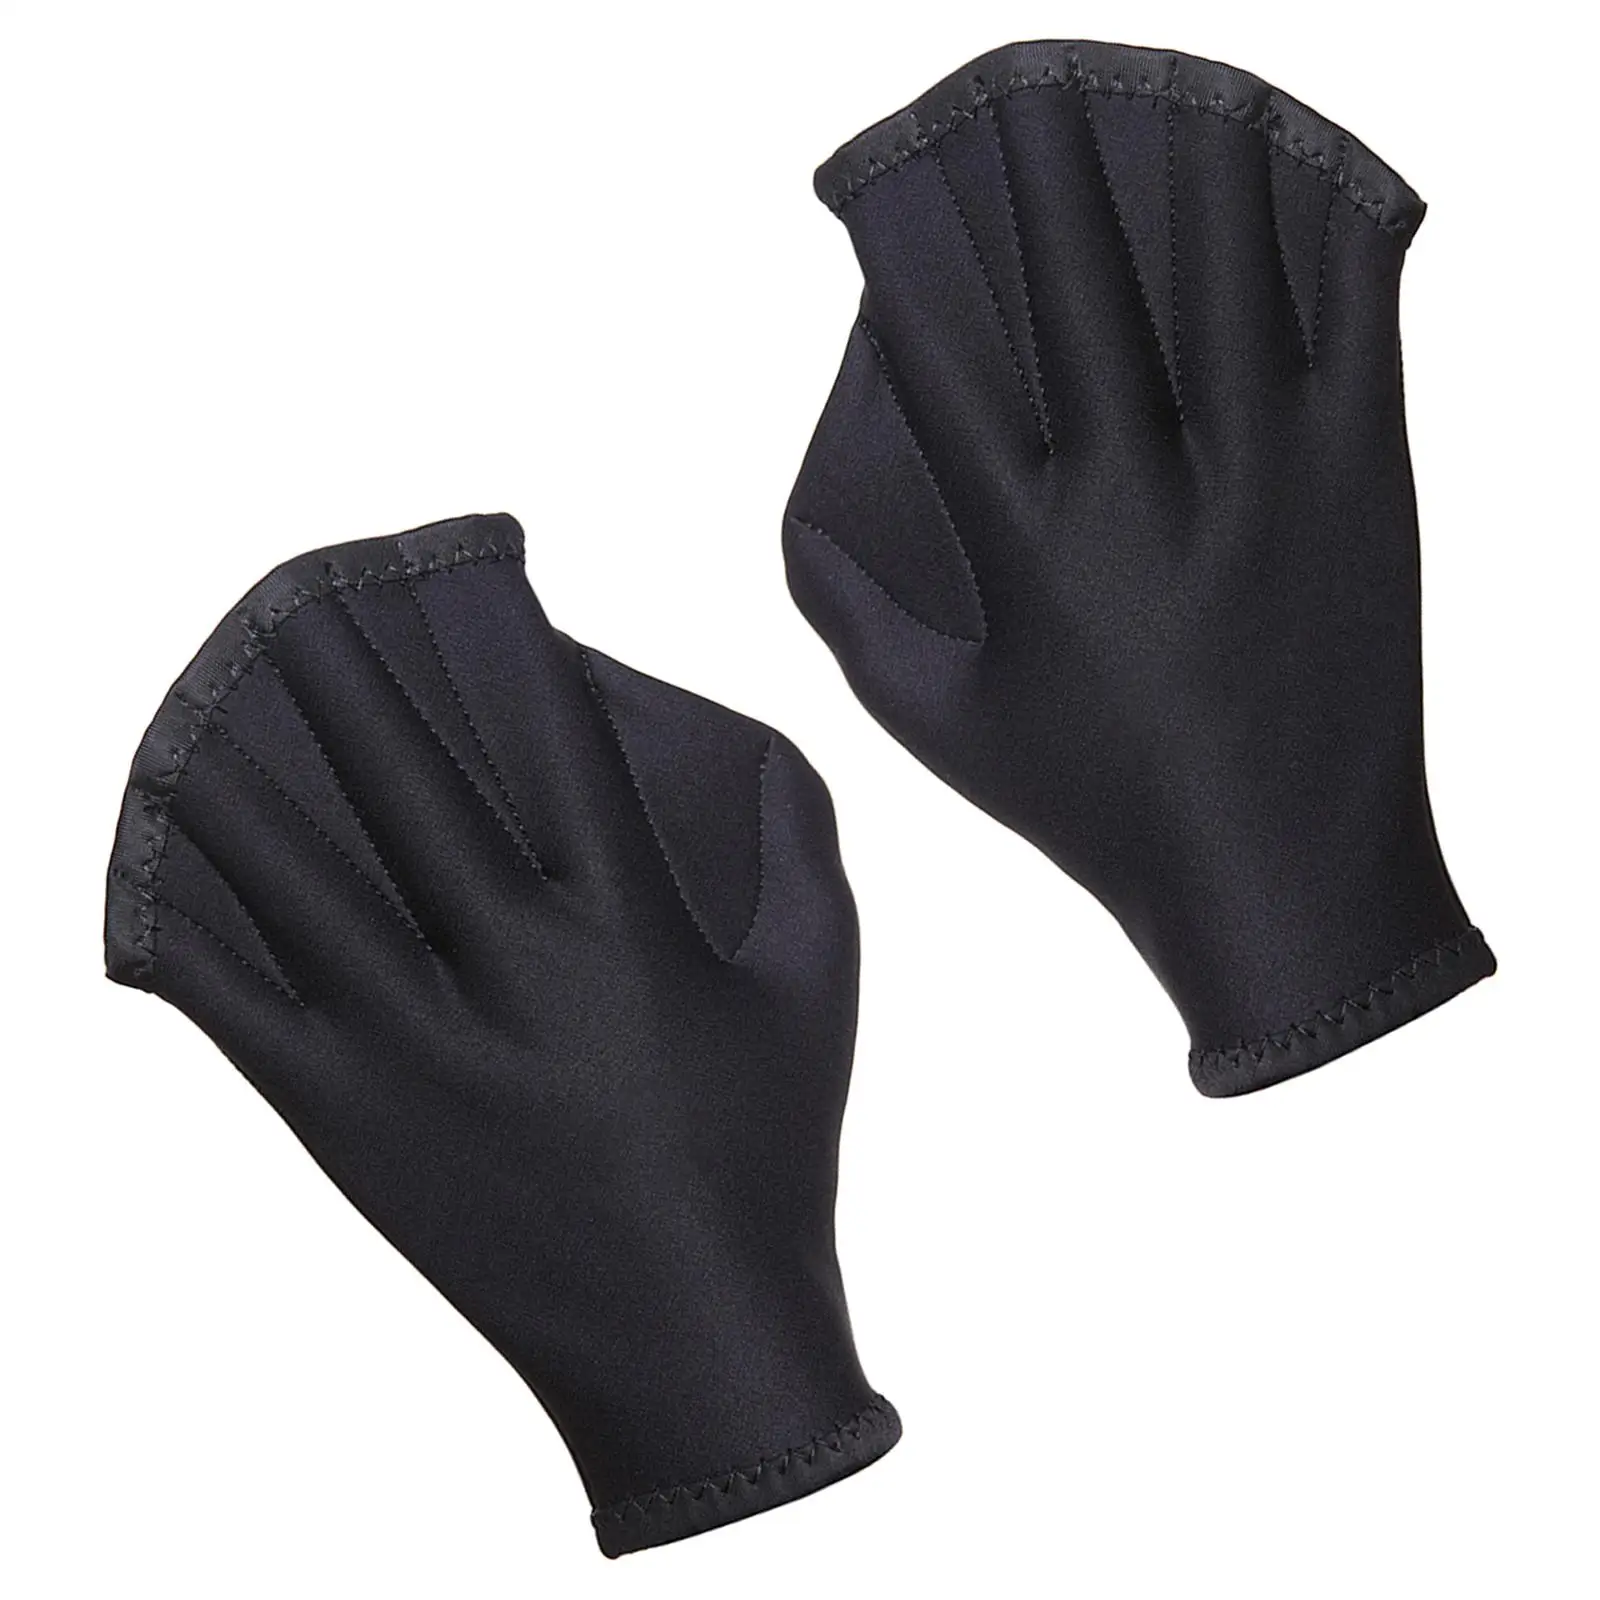 Aquatic Fit Swim Gloves , Webbed Swim Gloves Thicken Well Stitching for Kayaking Pool Playing